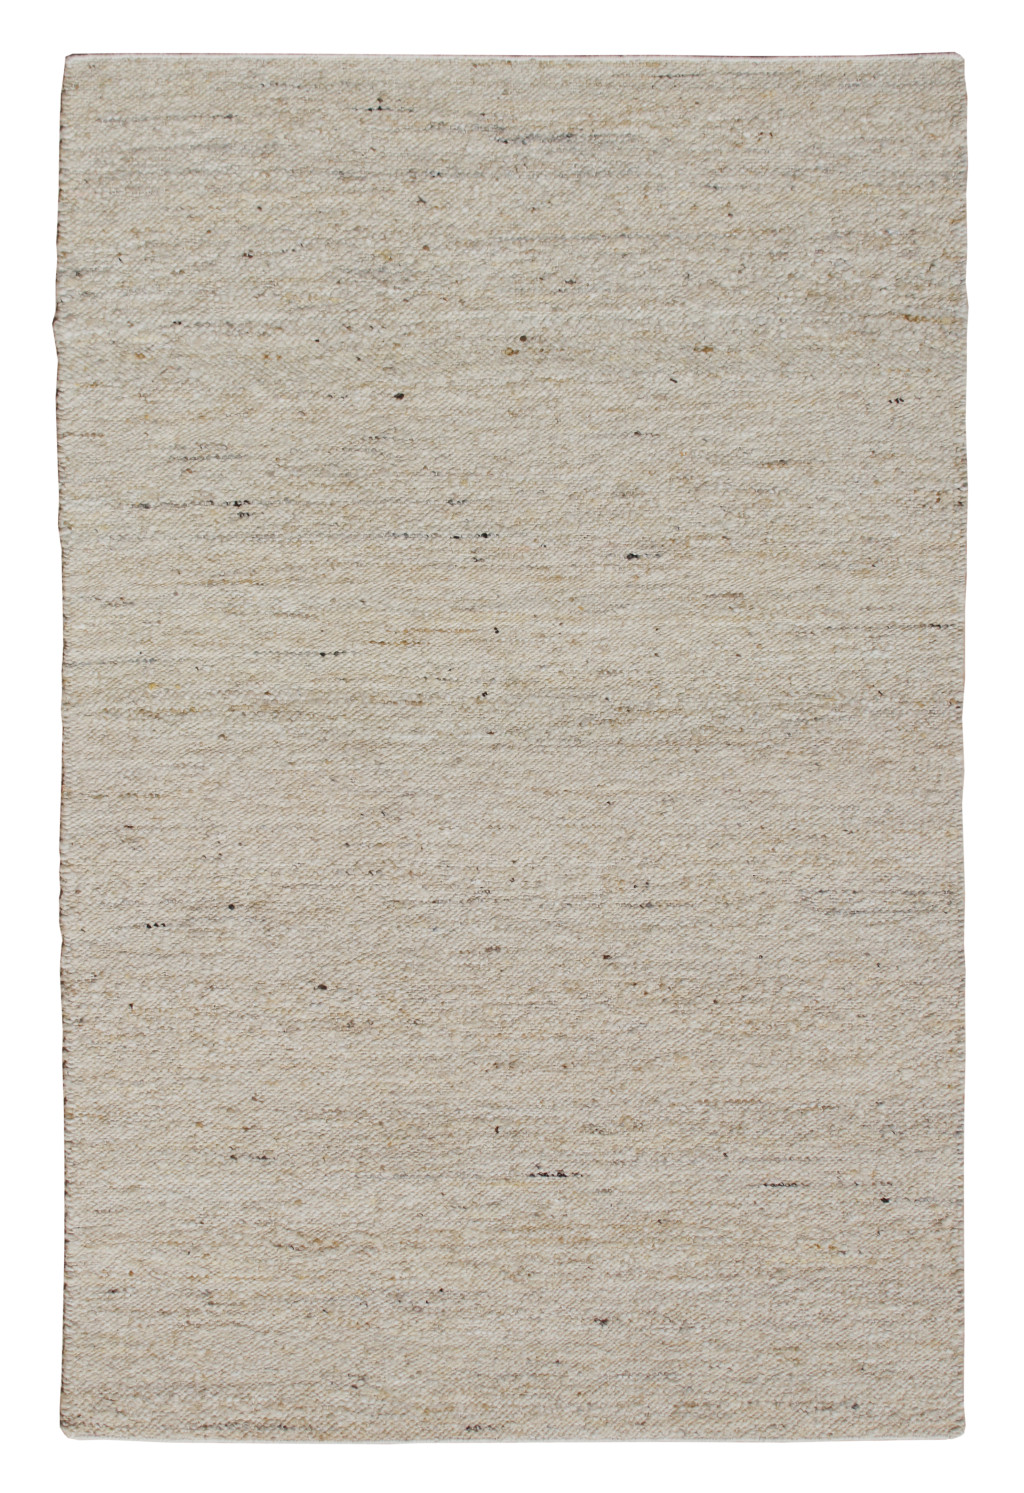 8' x 10' White Wool Hand Woven Area Rug-544141-1